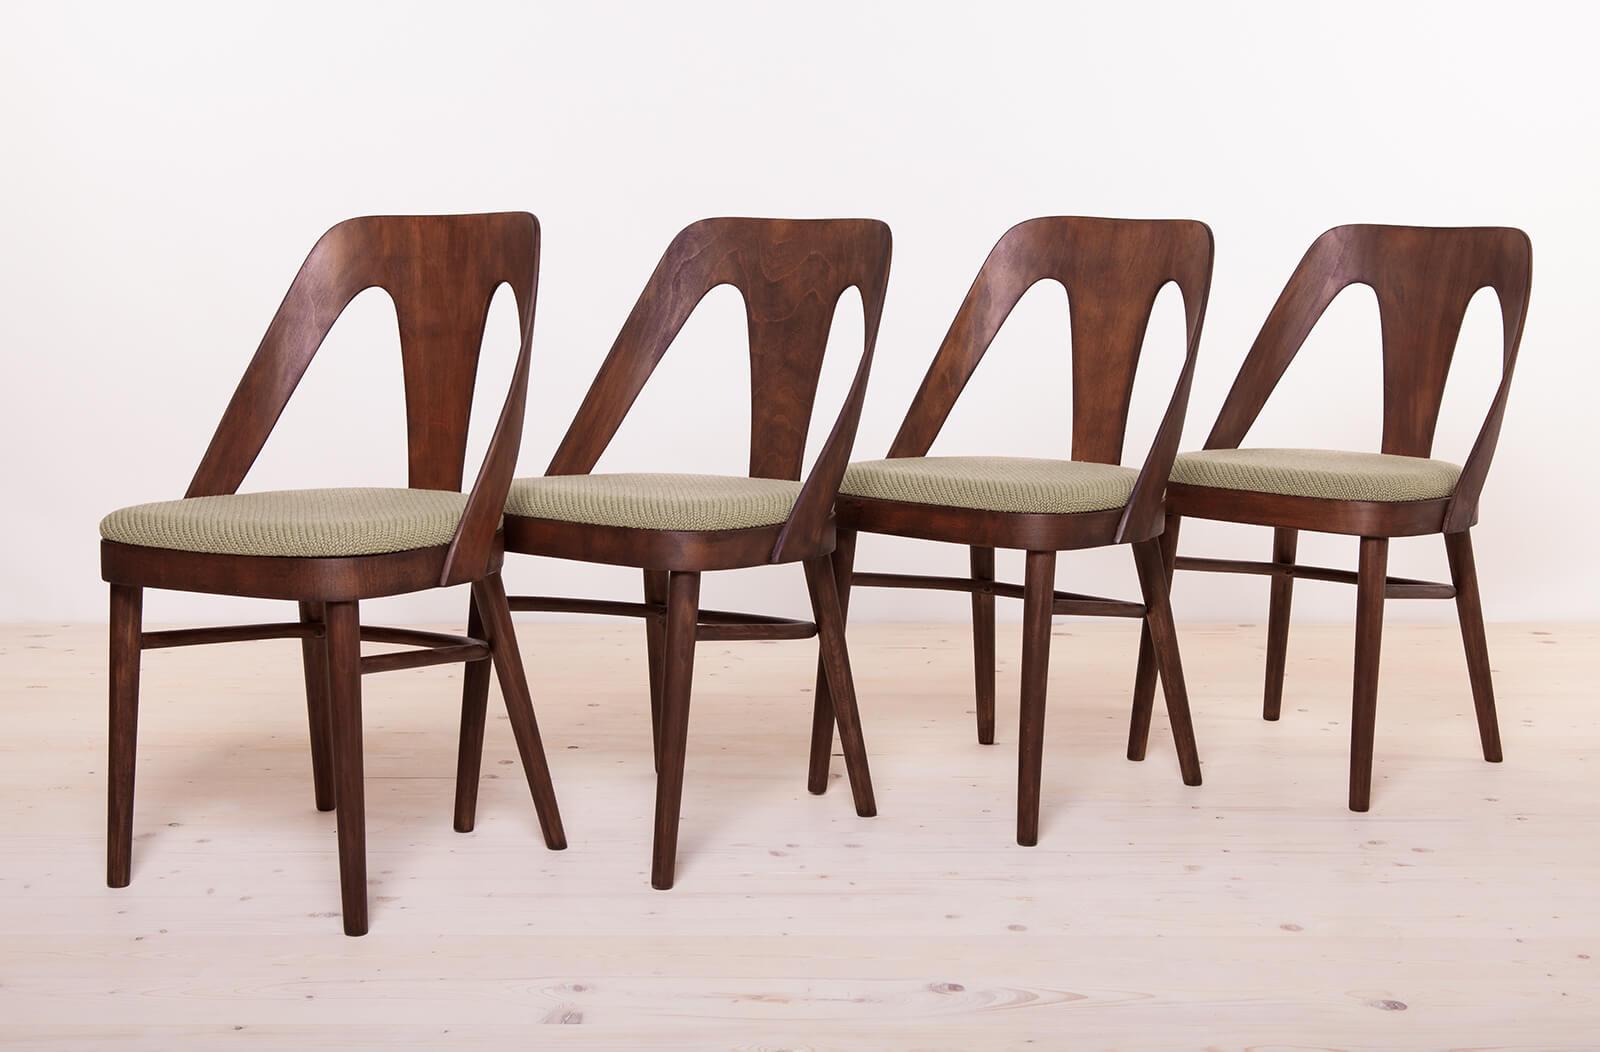 These iconic A6070 chairs were meticulously crafted in the 1950s at the renowned Bentwood Furniture Factory – FAMEG in Radomsko, Poland. Amidst the plethora of models produced by Fameg during that era, the A6070 chairs stand out, boasting an